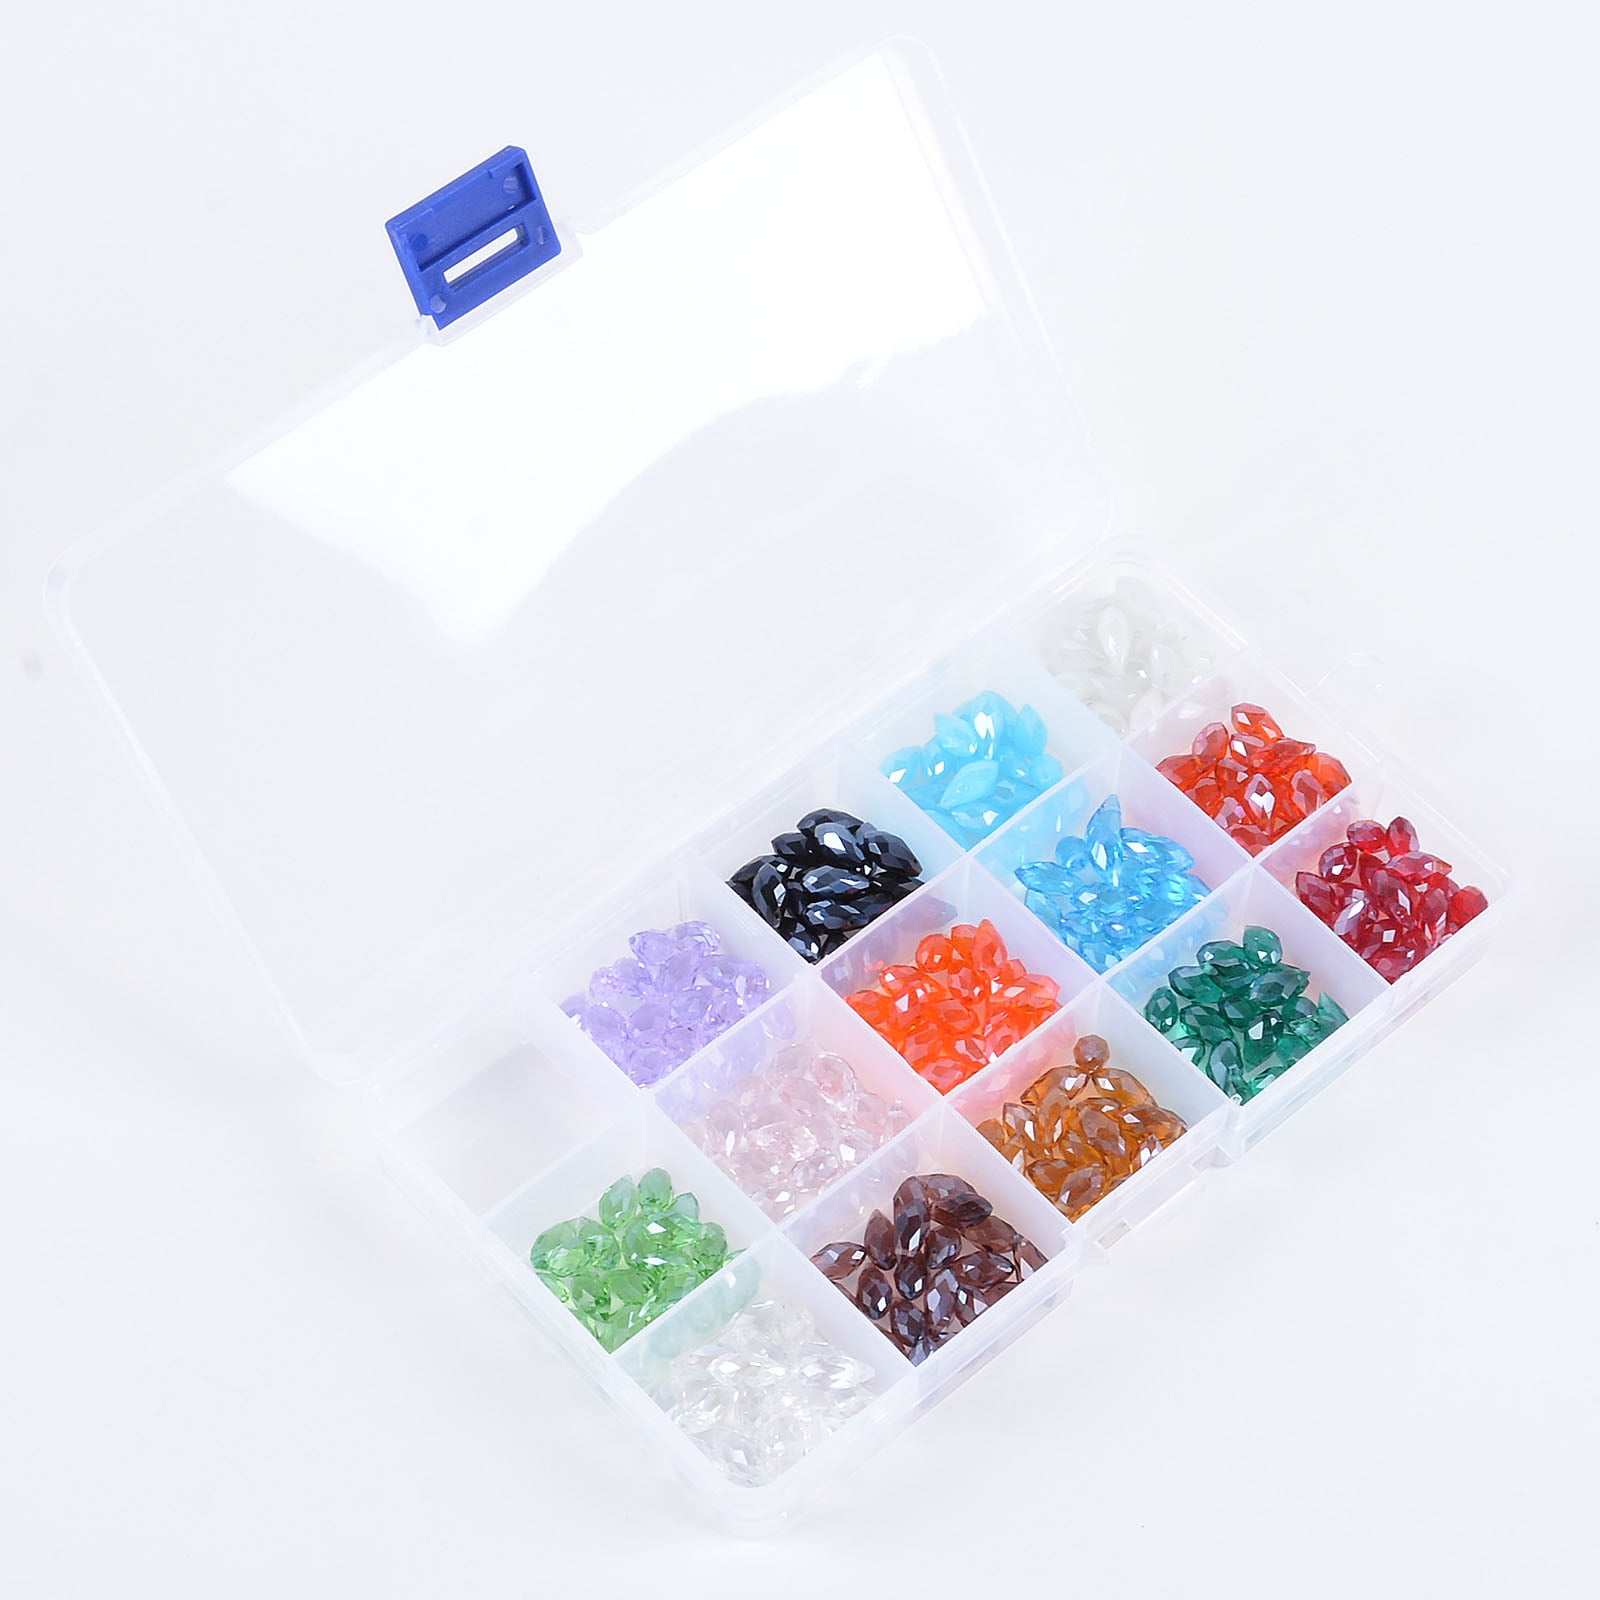 LONGWIN Lot 280pcs 6x12mm Faceted Teardrop Loose Crystal Beads Jewelry Making Supplies